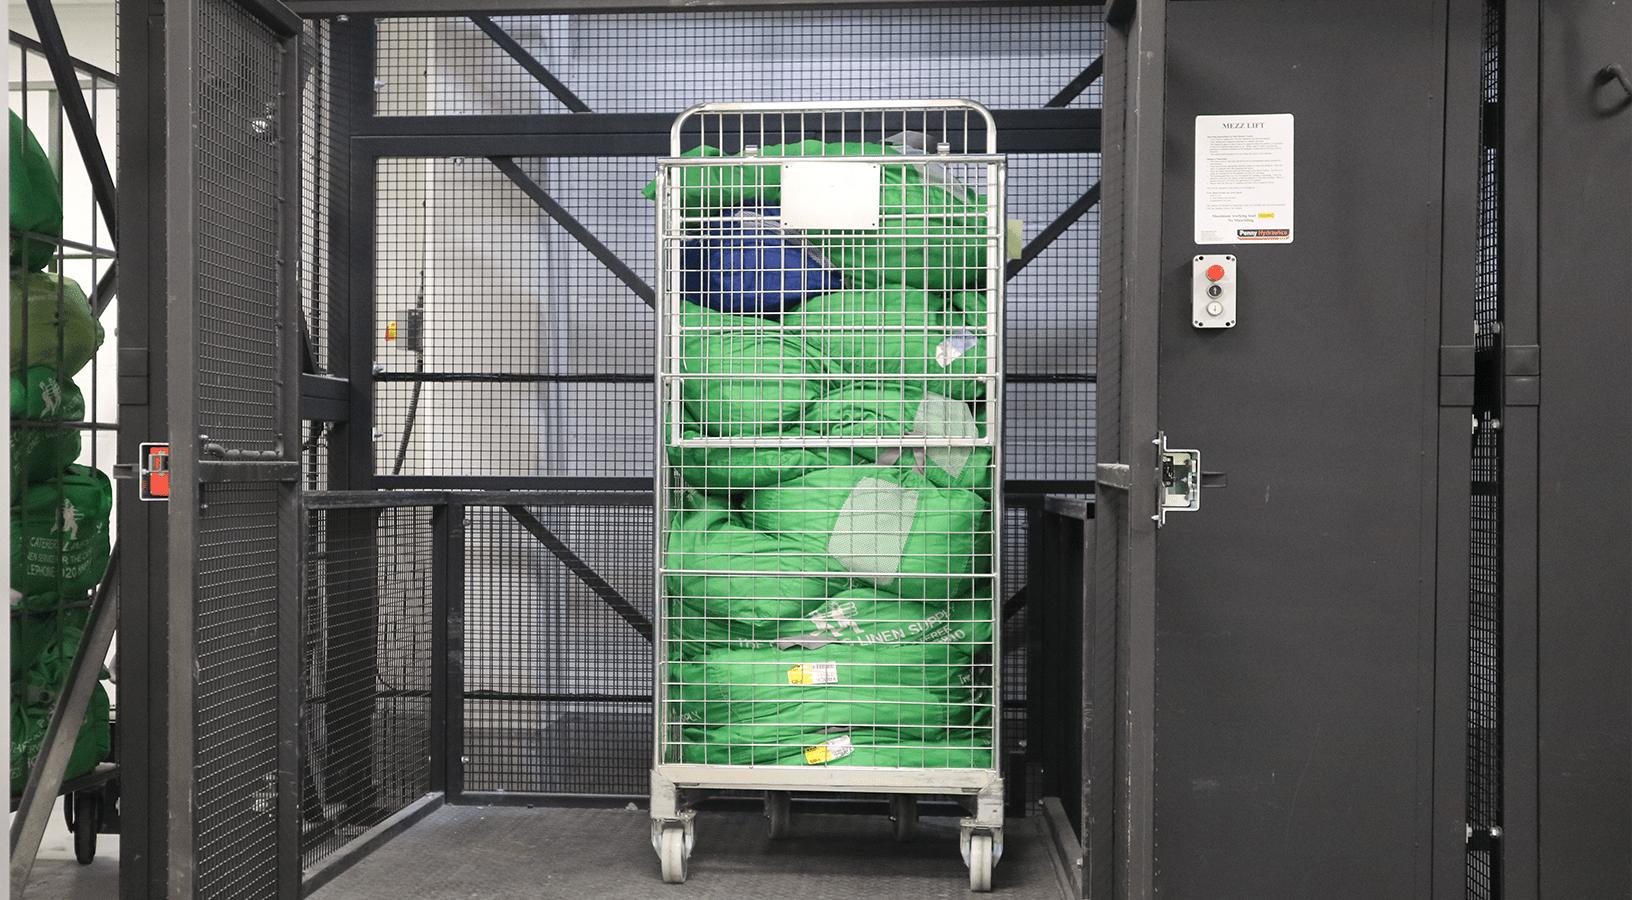 Mezzanine Floor Lift: A Guide to No Pit Mezz Lifts - Penny Engineering